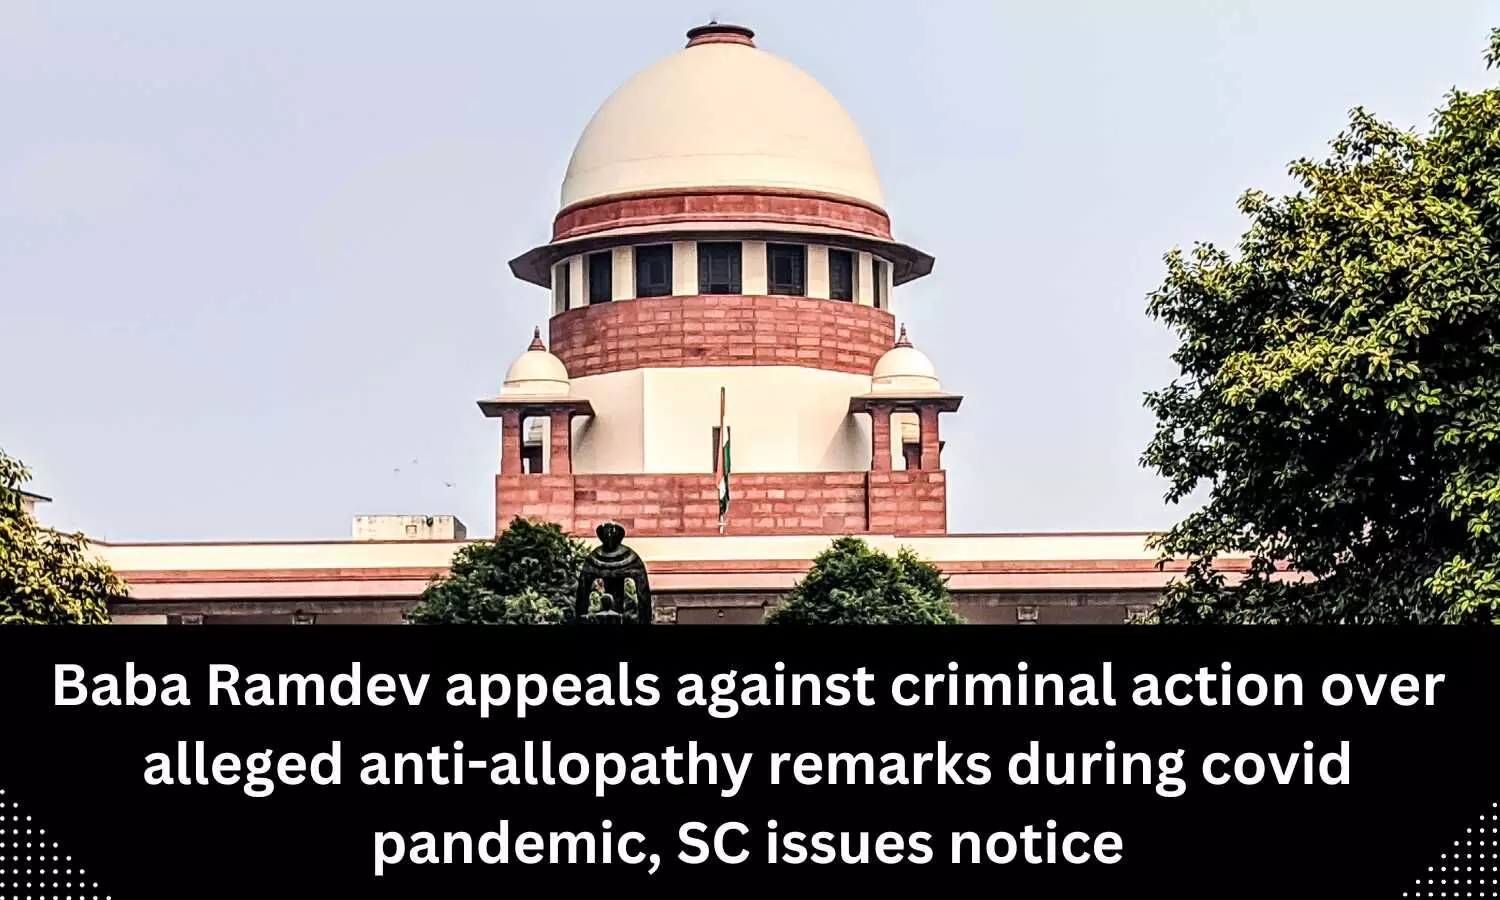 Baba Ramdev appeals against criminal action over alleged anti-allopathy remarks during covid pandemic, SC issues notice